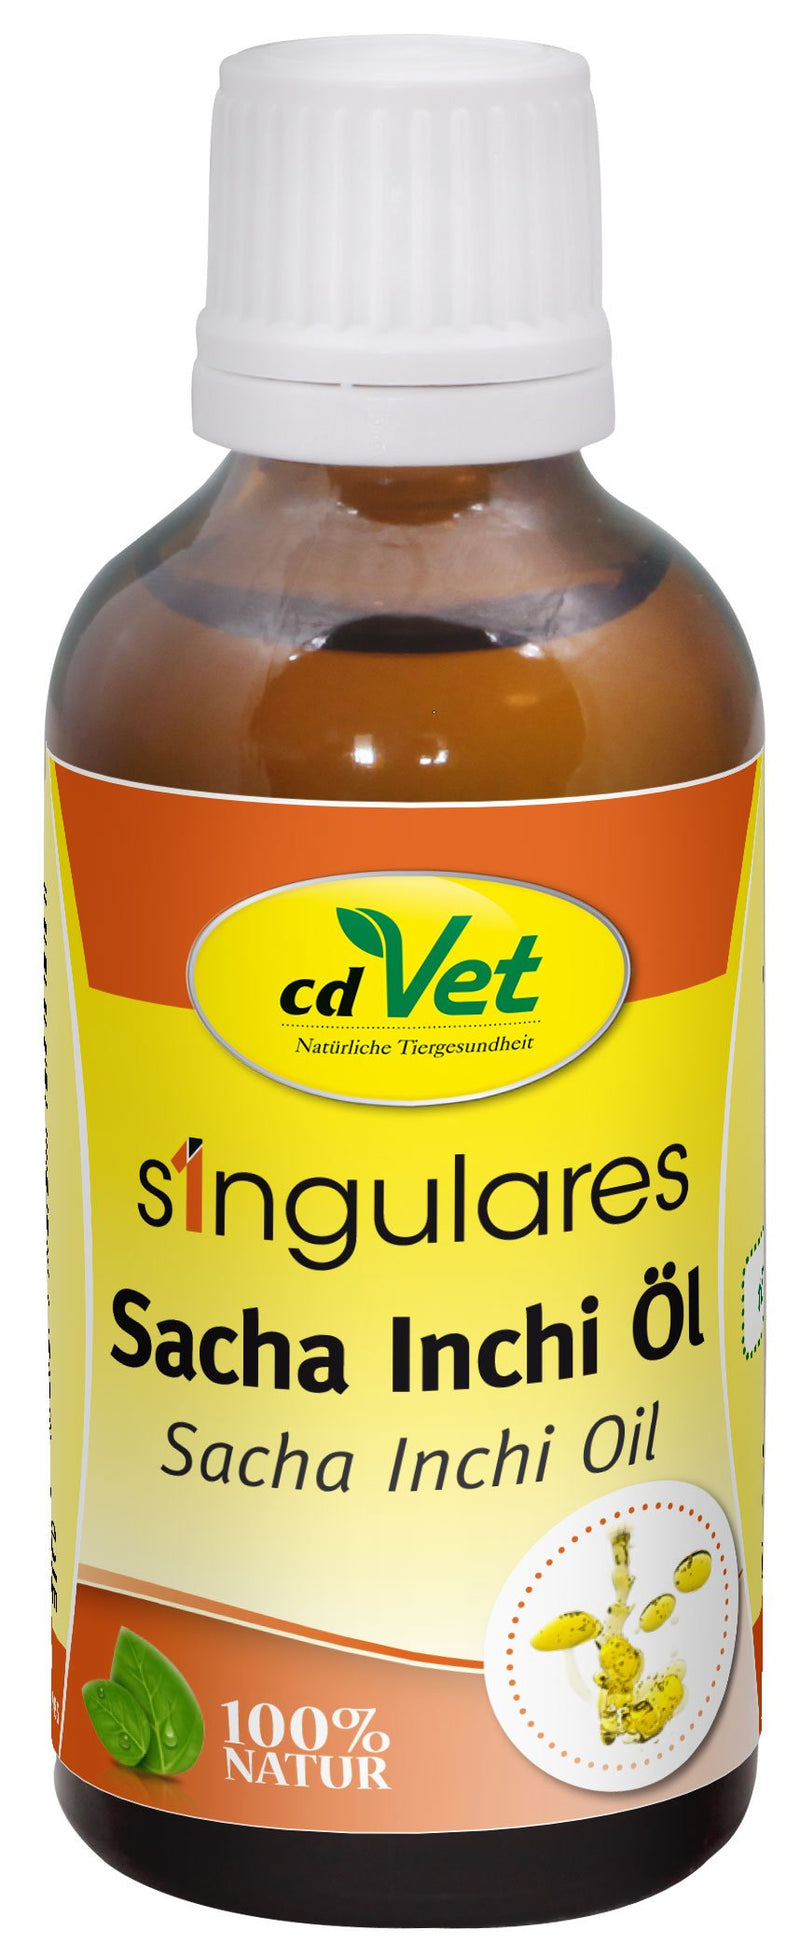 cdVet Natural Products Singulares Sacha Inchi Oil 50 ml - Dog, Cat - Food Supplement - High Digestibility - Rich in Vitamin A+E - Omega 3, Omega 6, Omega 9 Fatty Acids - 100% Natural - - PawsPlanet Australia